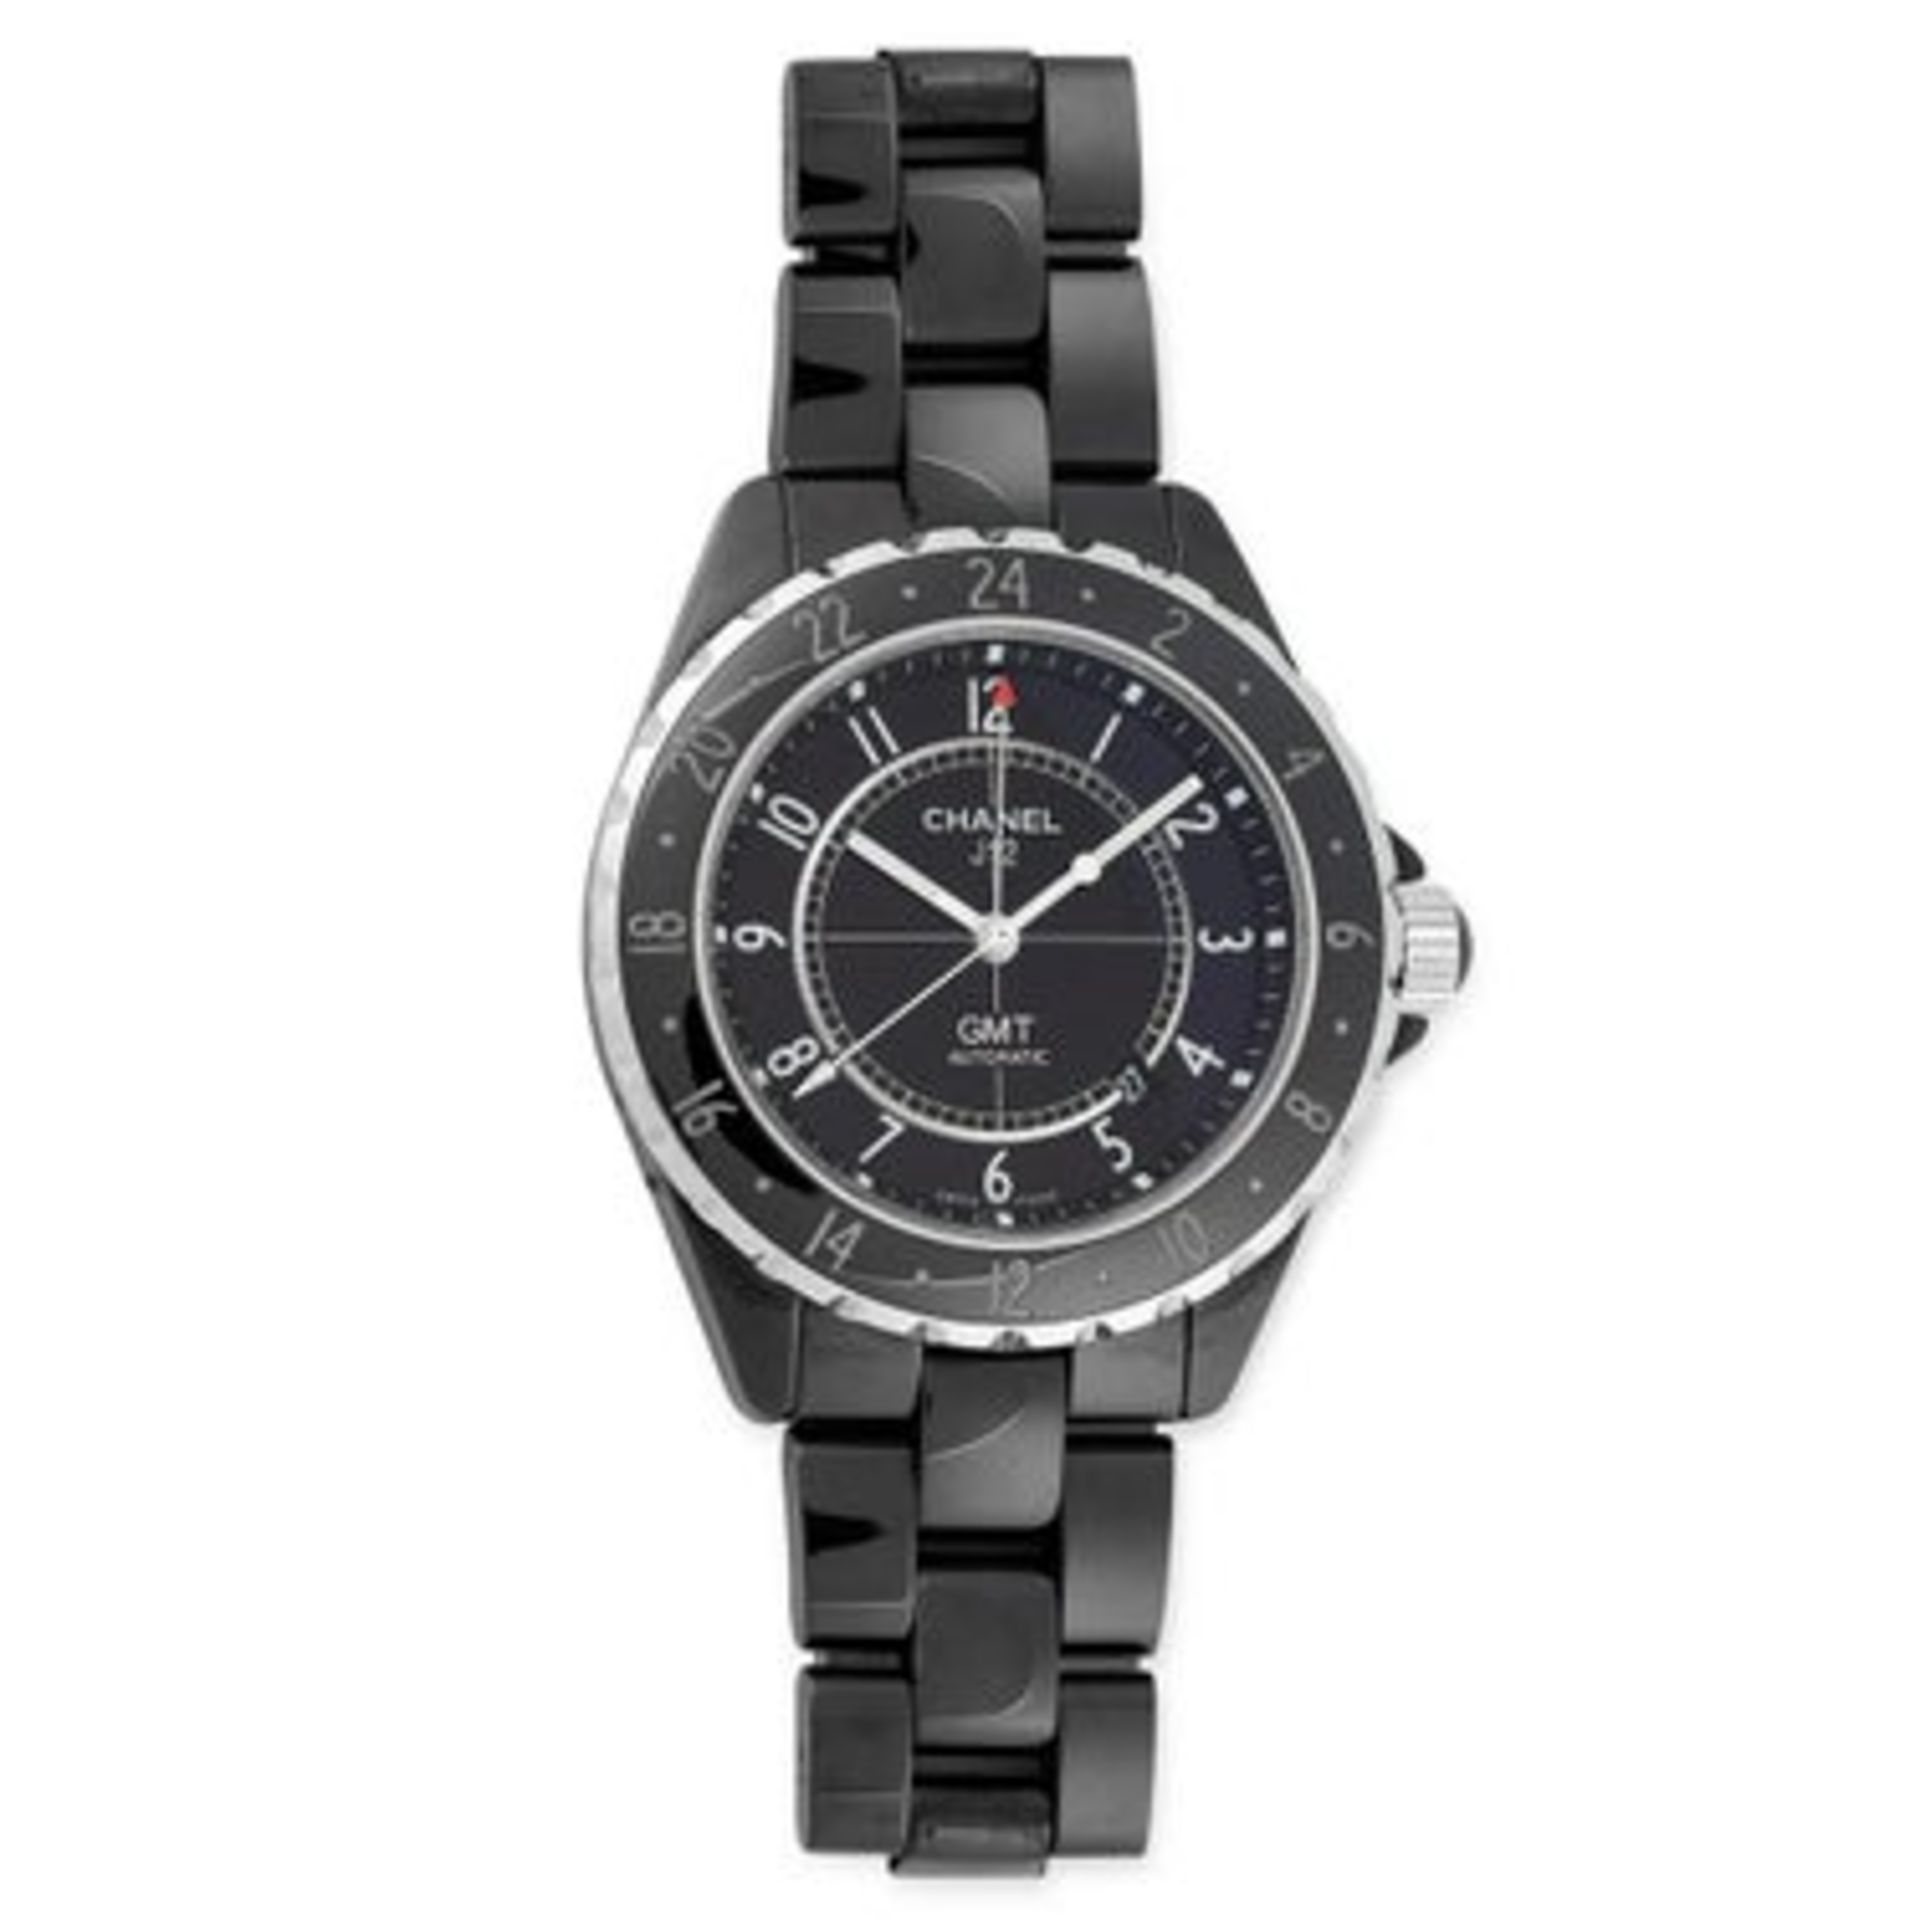 A LADIES J12 WATCH, CHANEL in black ceramic, with